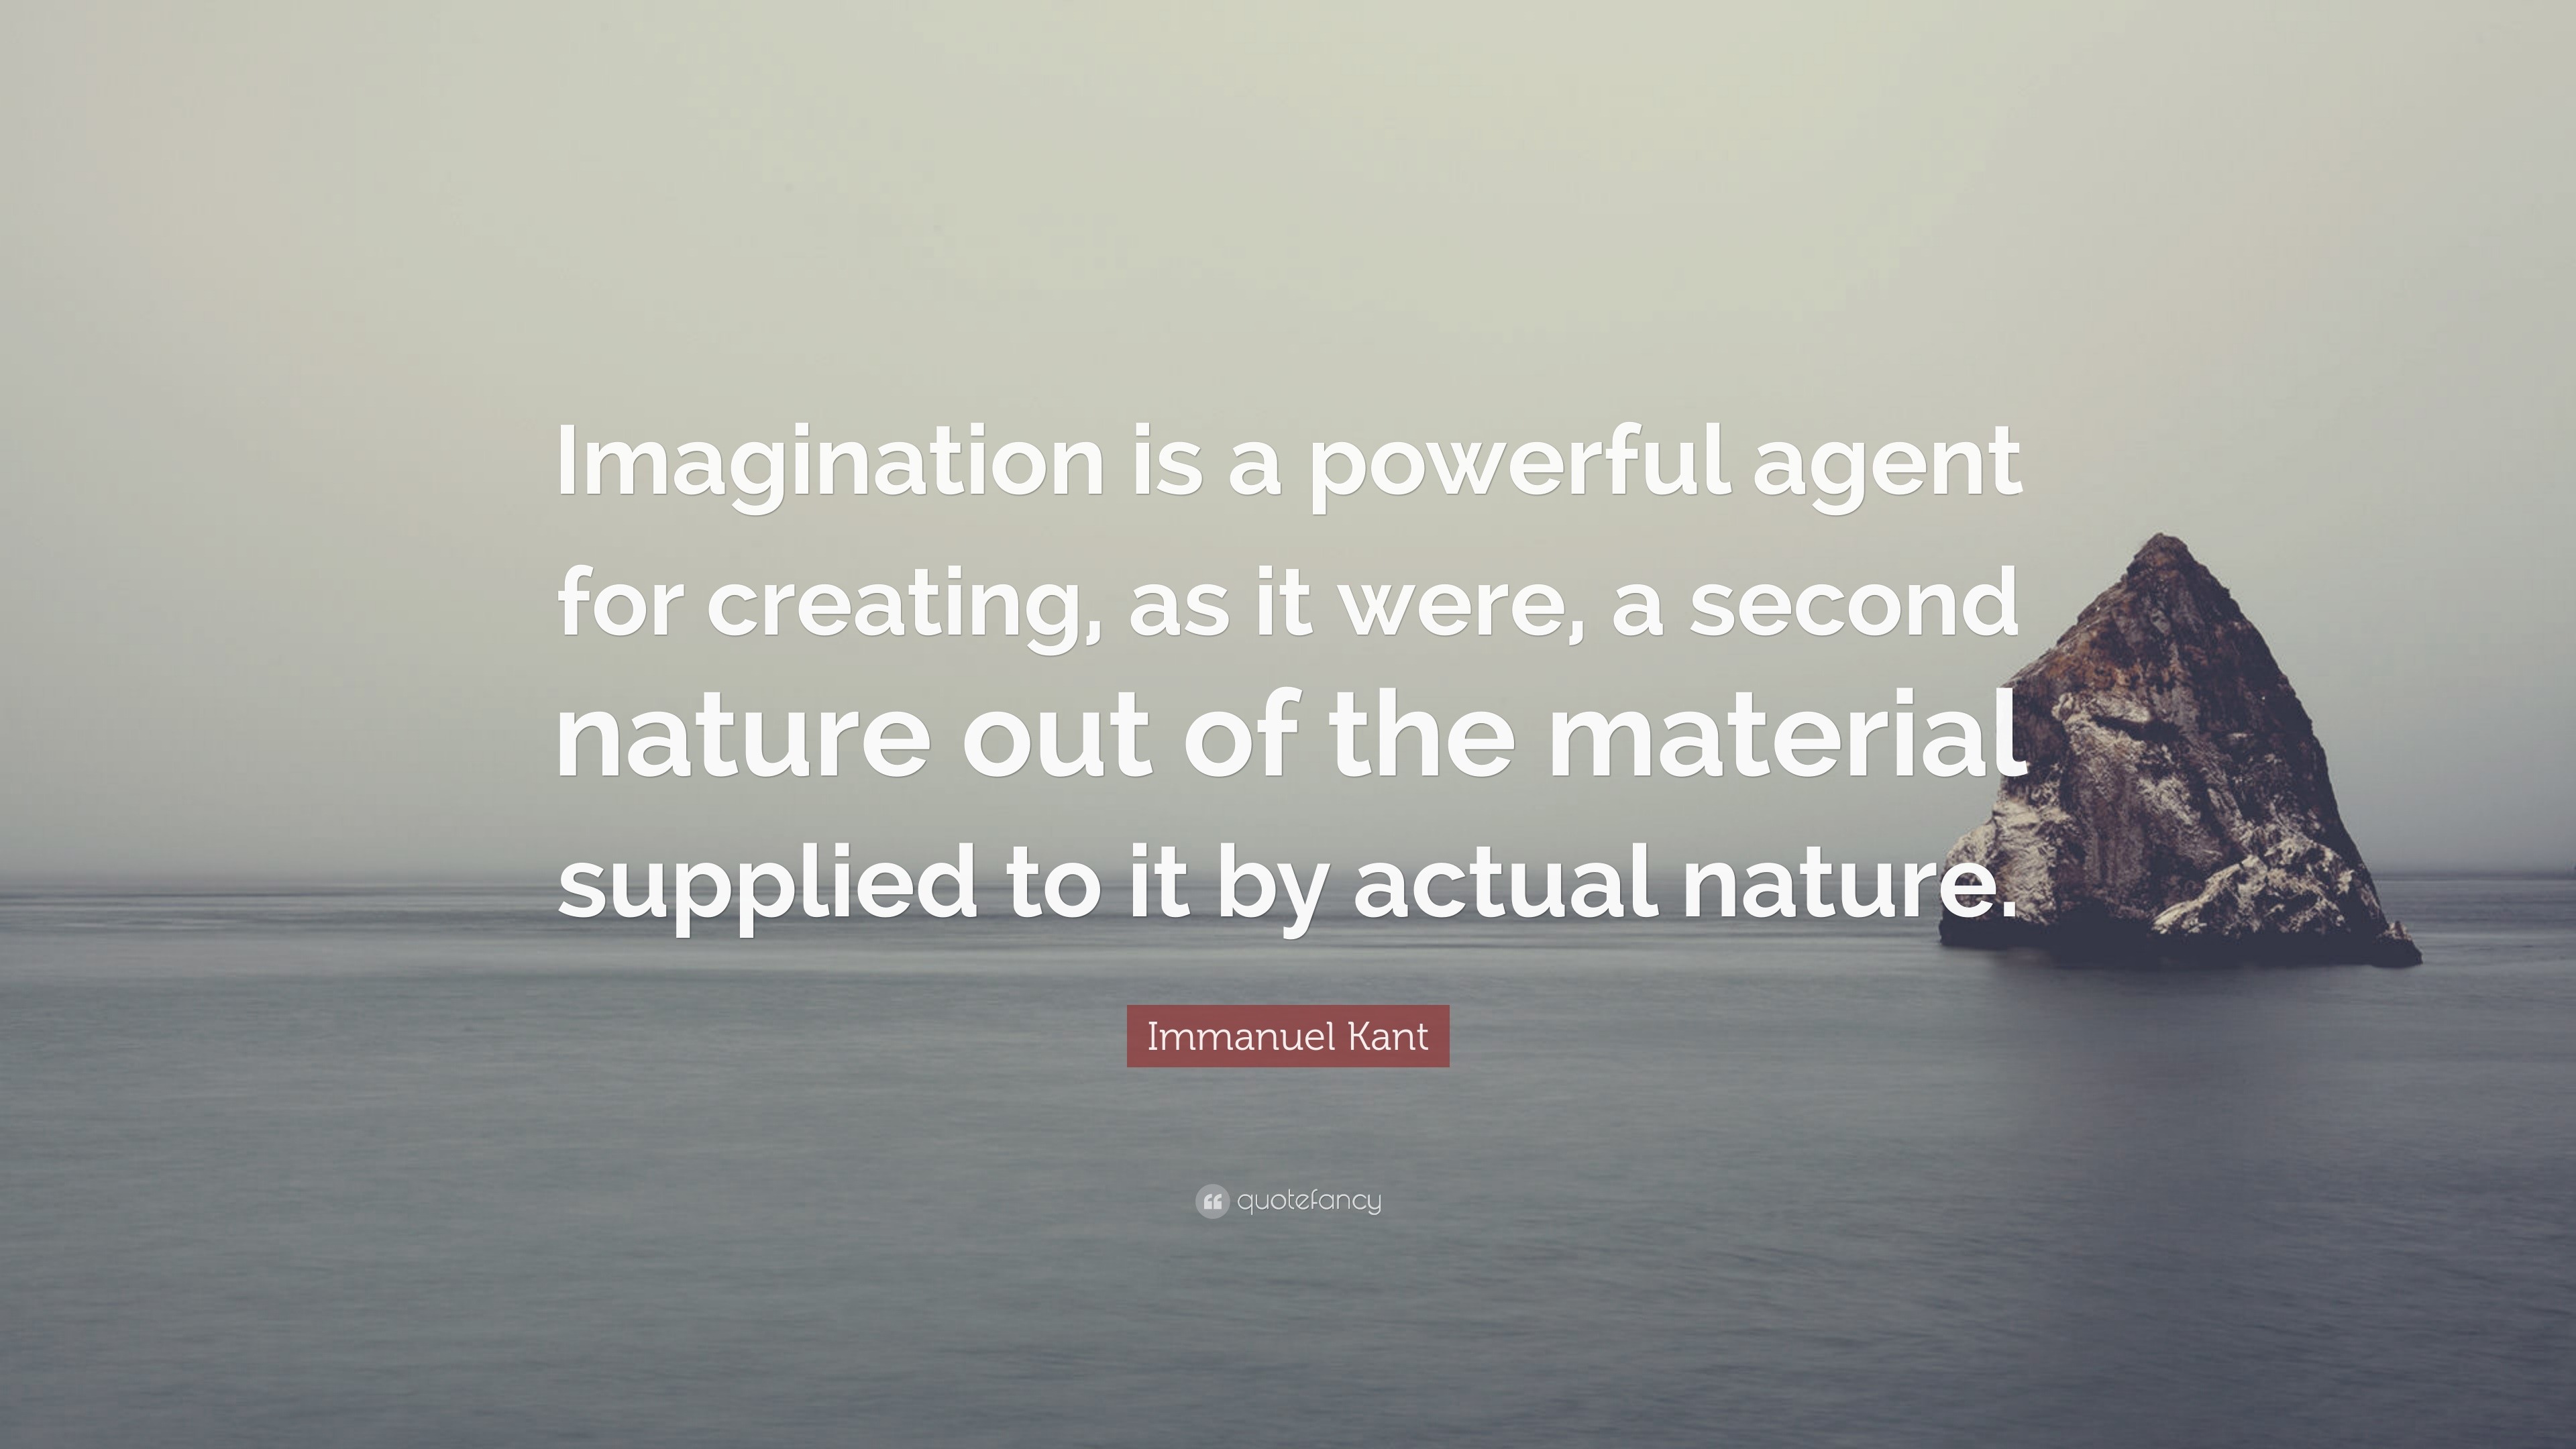 Kant Quote: “Imagination is a powerful agent for creating, as it were, a second out of the material it by actual n...”